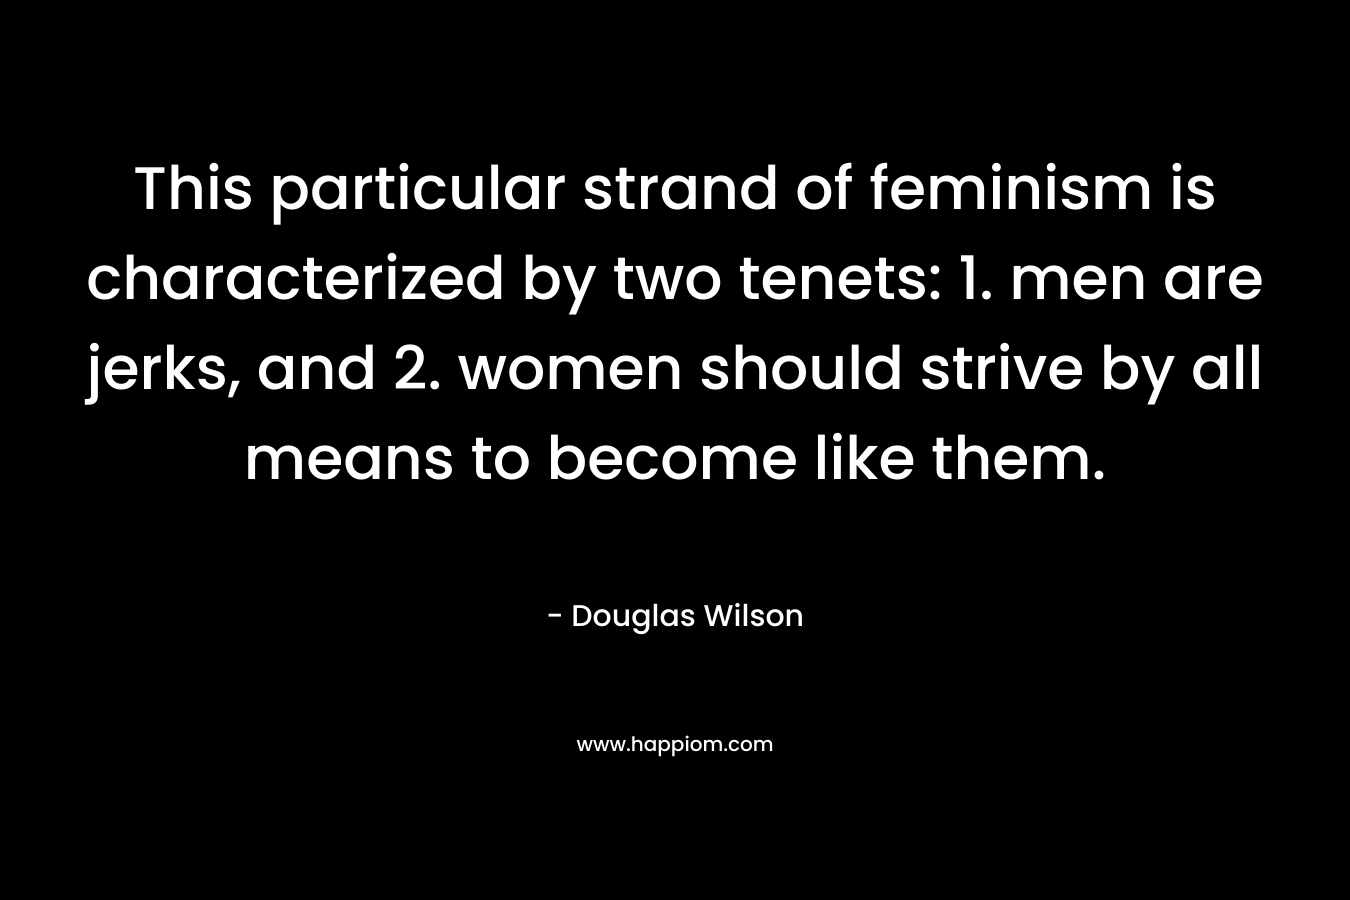 This particular strand of feminism is characterized by two tenets: 1. men are jerks, and 2. women should strive by all means to become like them.